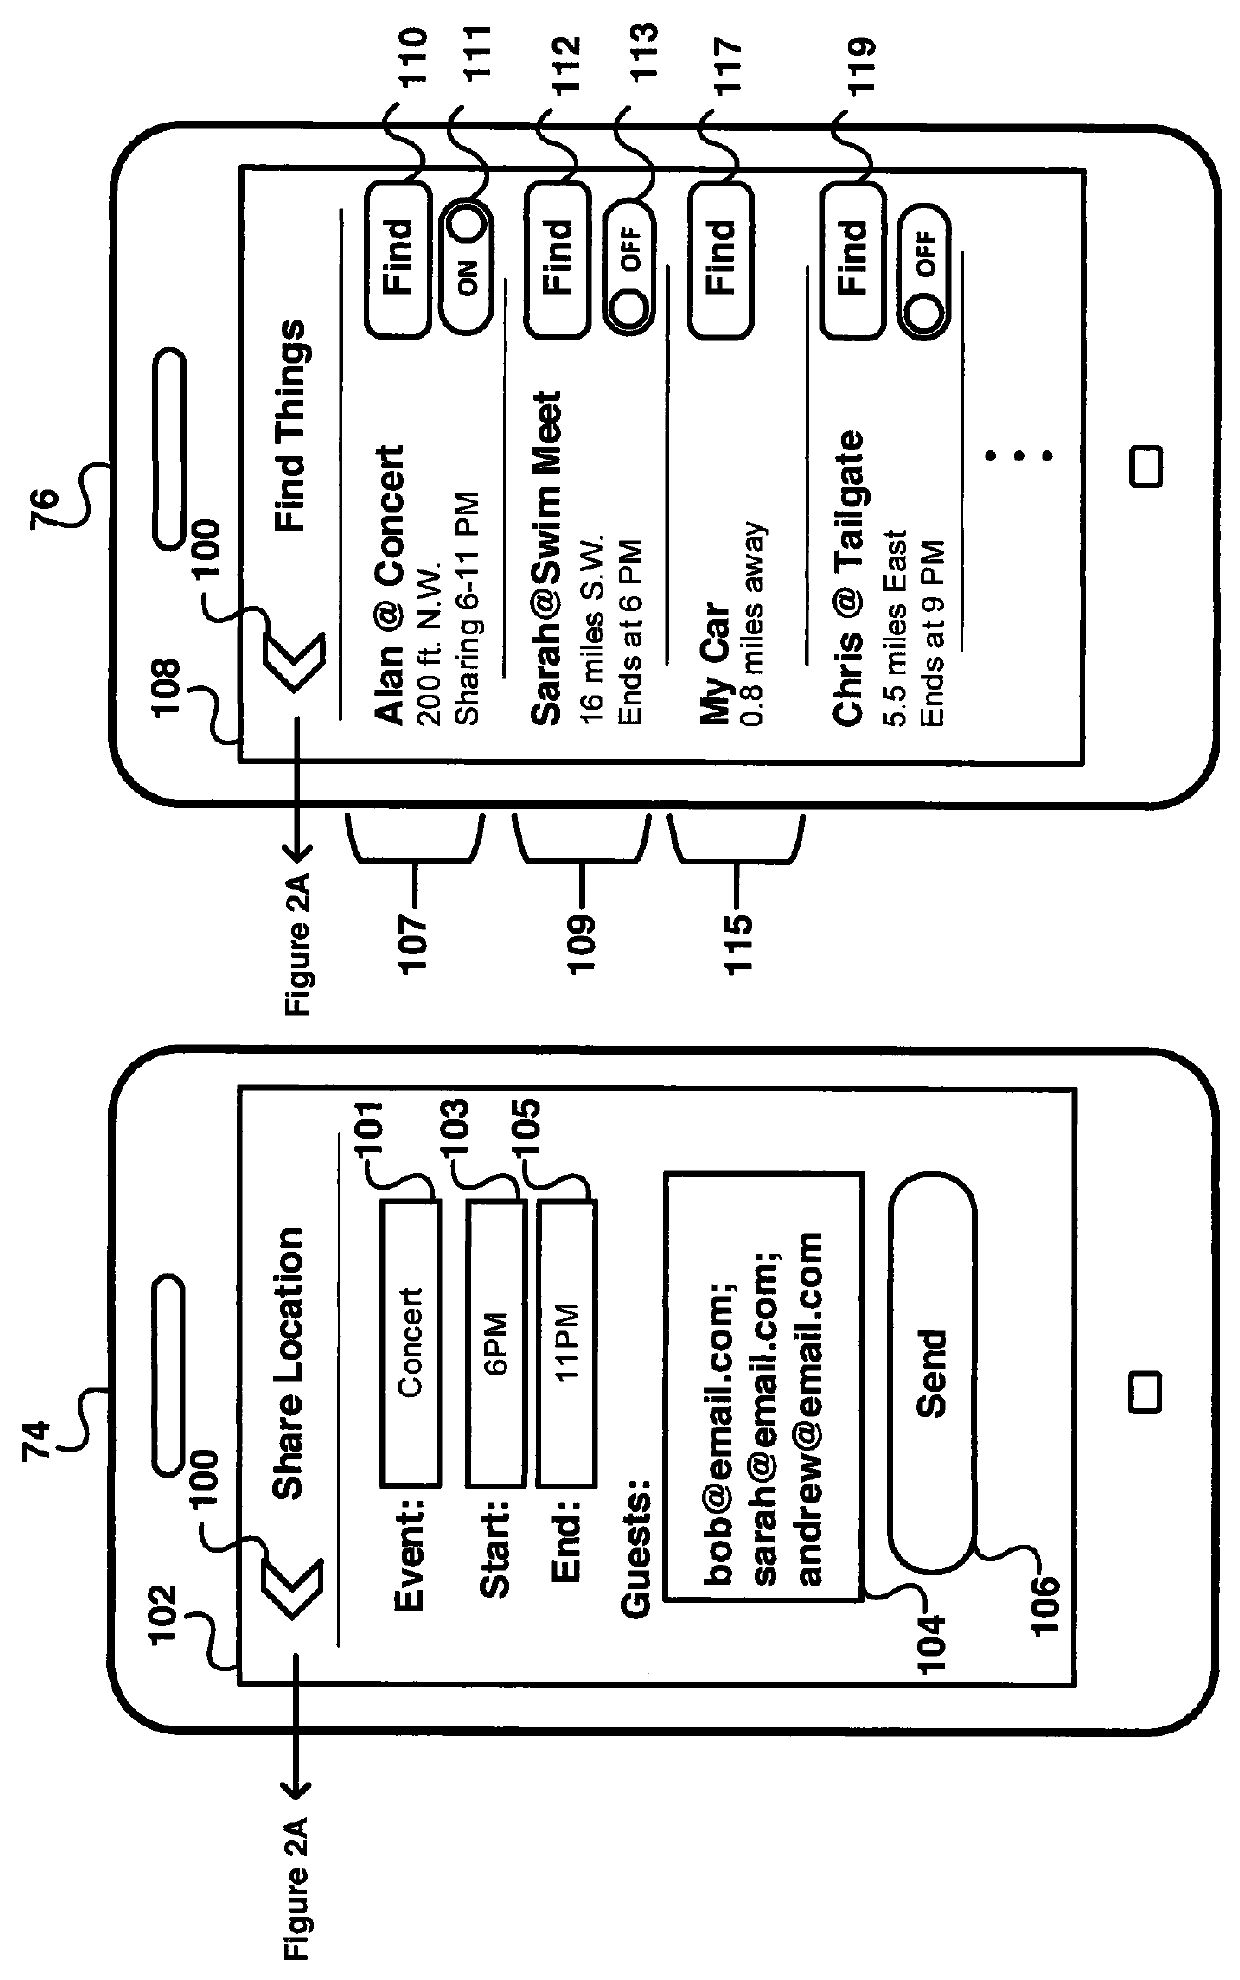 Methods and systems for locating persons and places with mobile devices